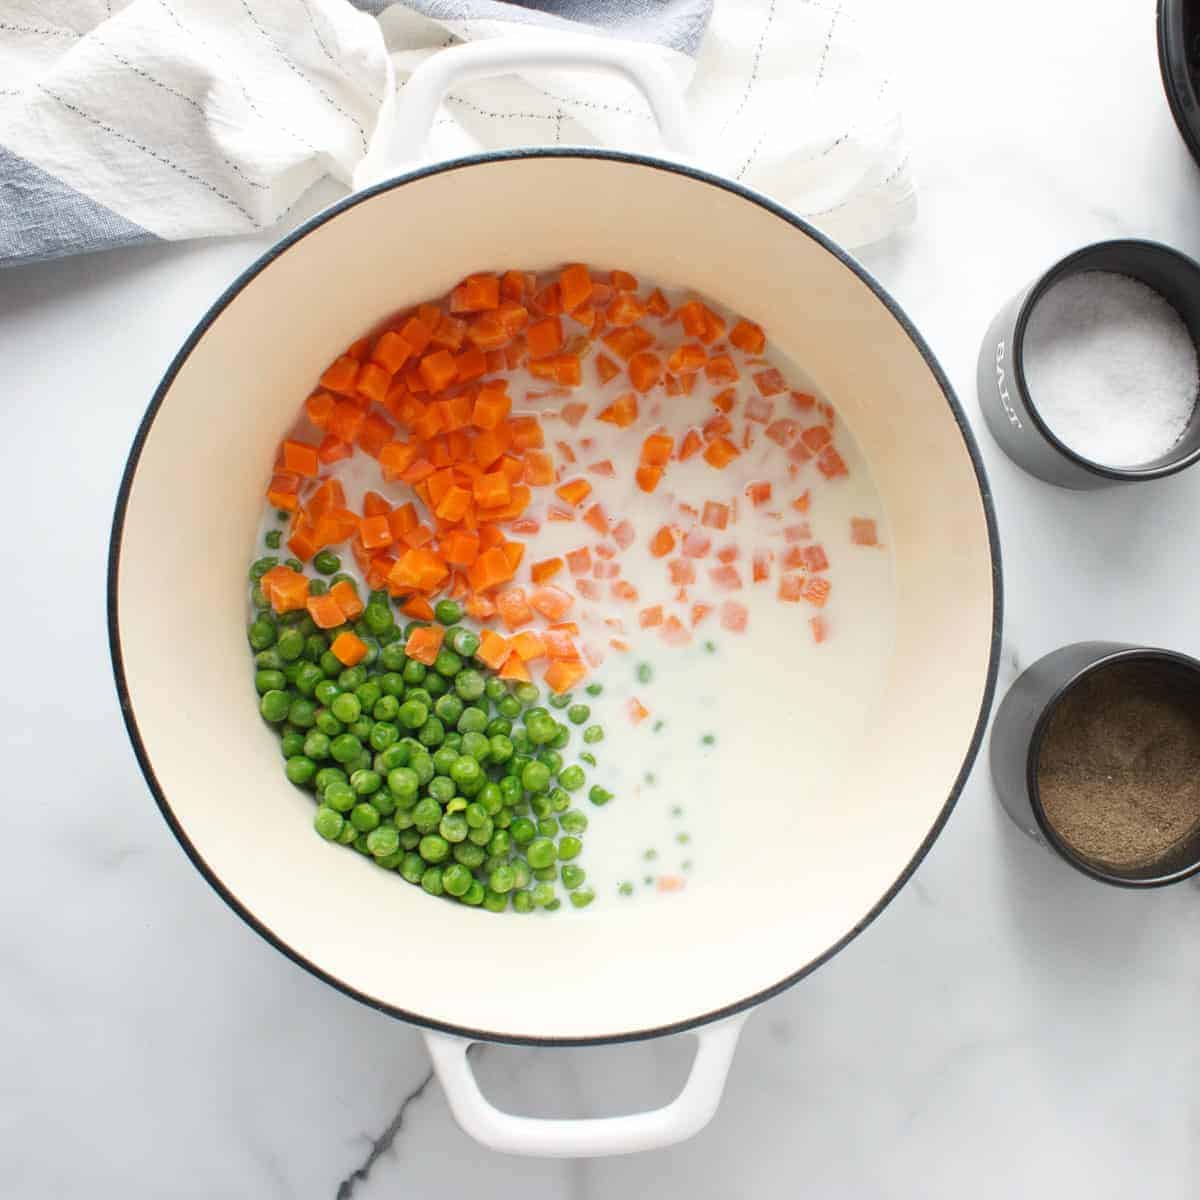 Carrots, peas, and chicken stock in white dutch oven.